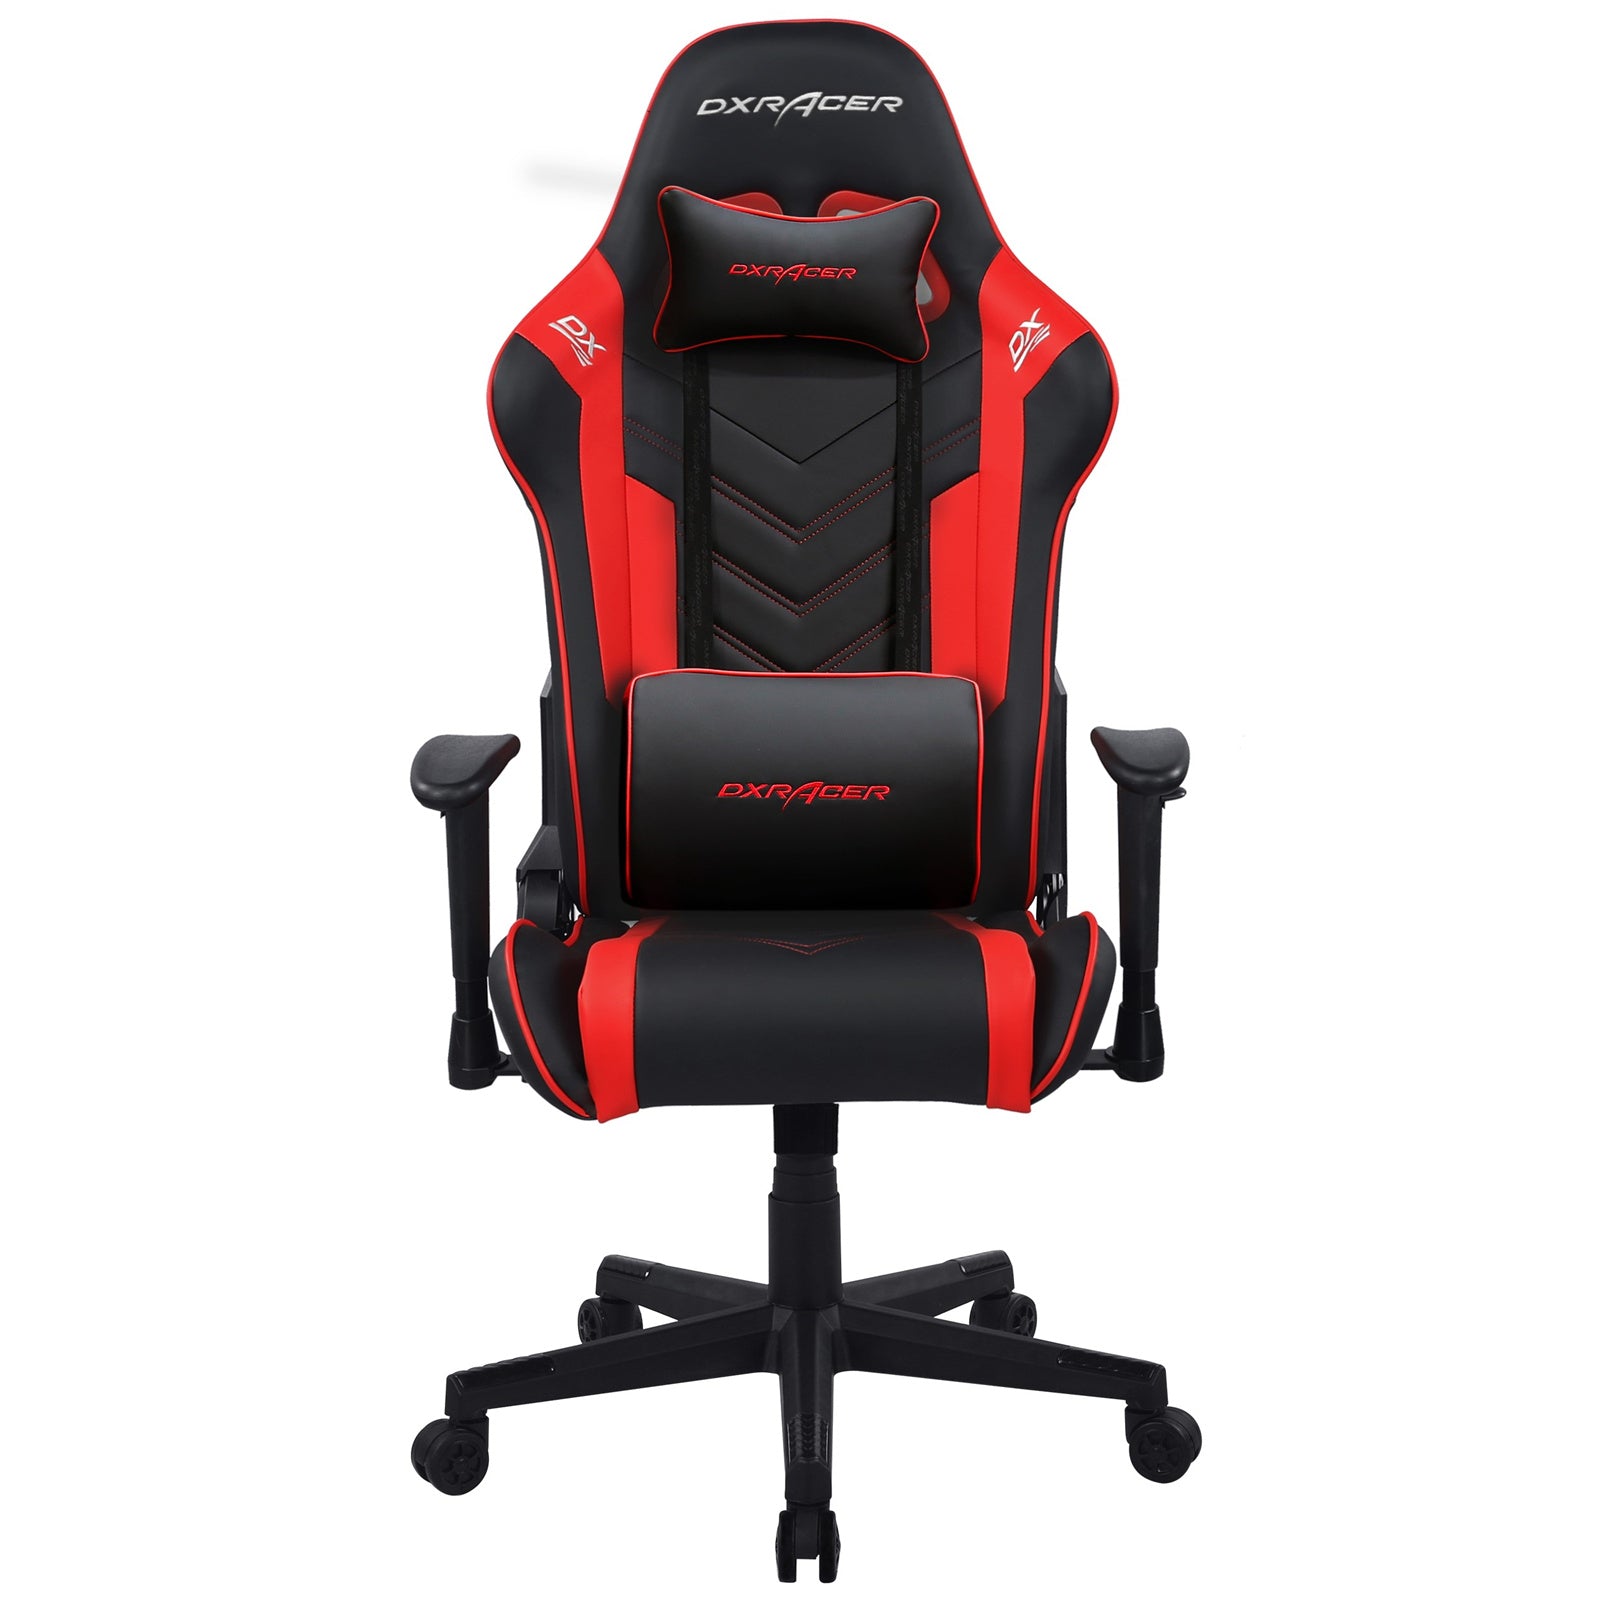 DXRacer P132 Prince Series Gaming Chair - Red/Black